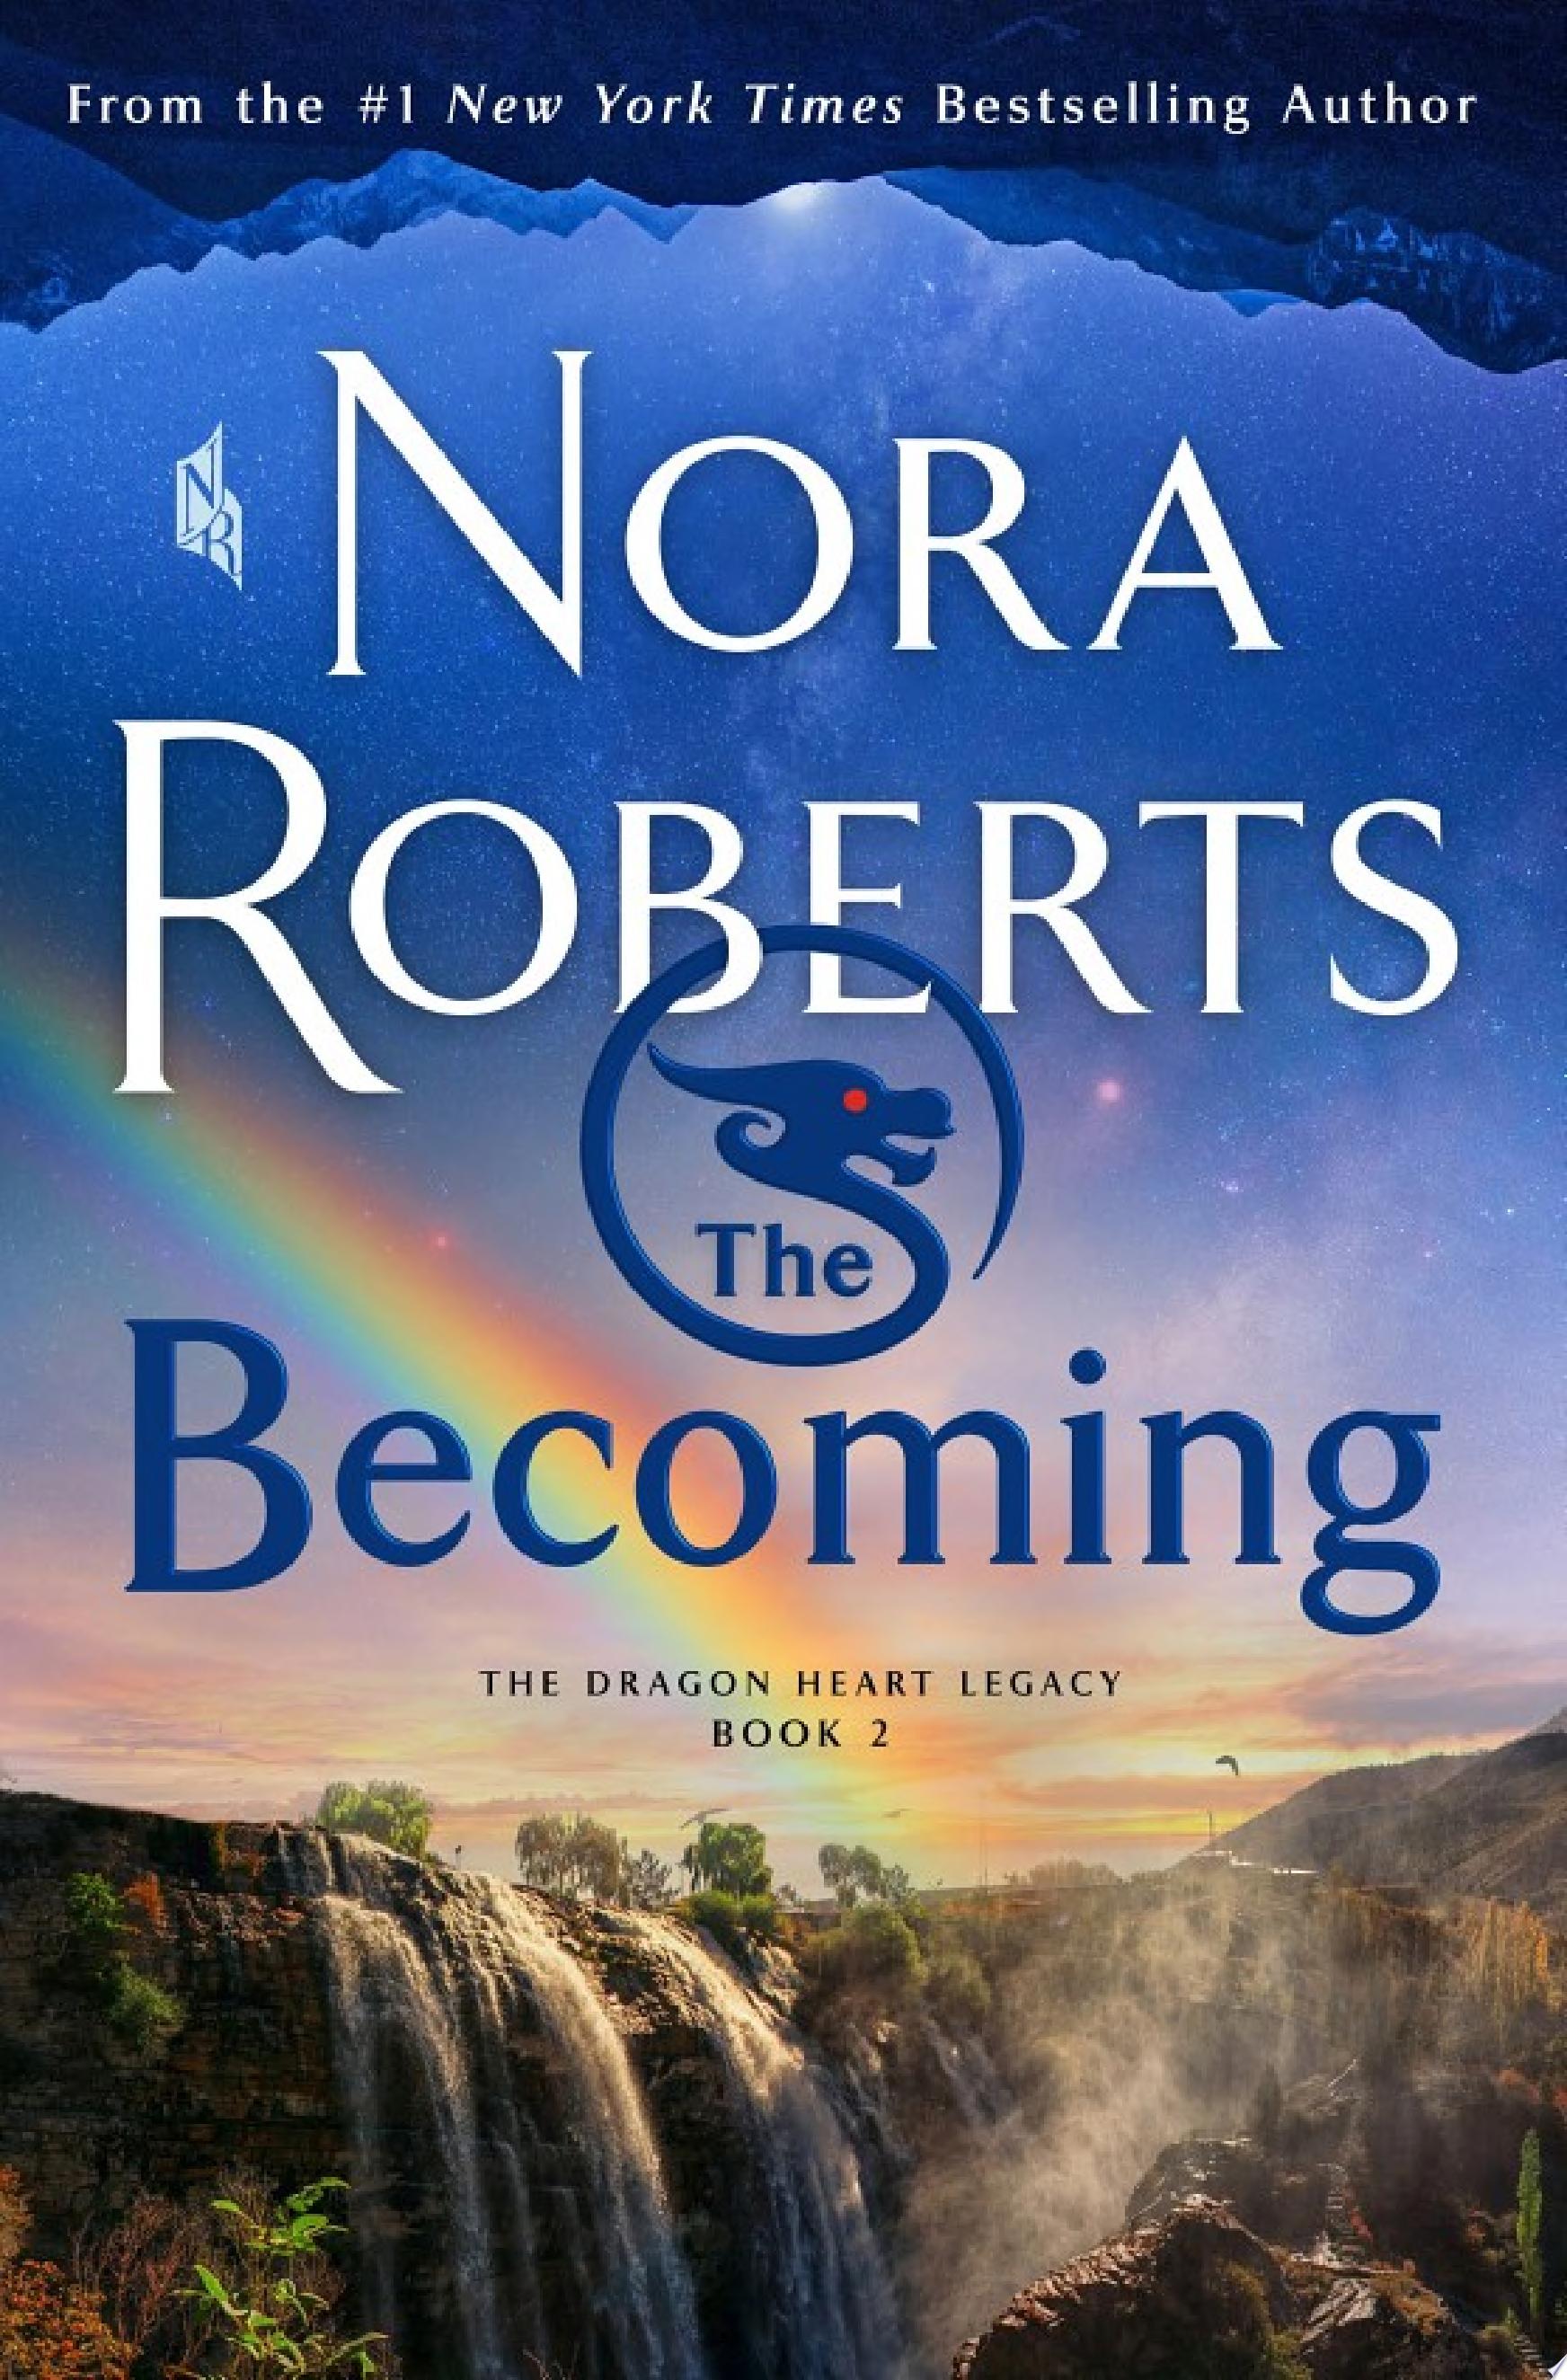 Image for "The Becoming"